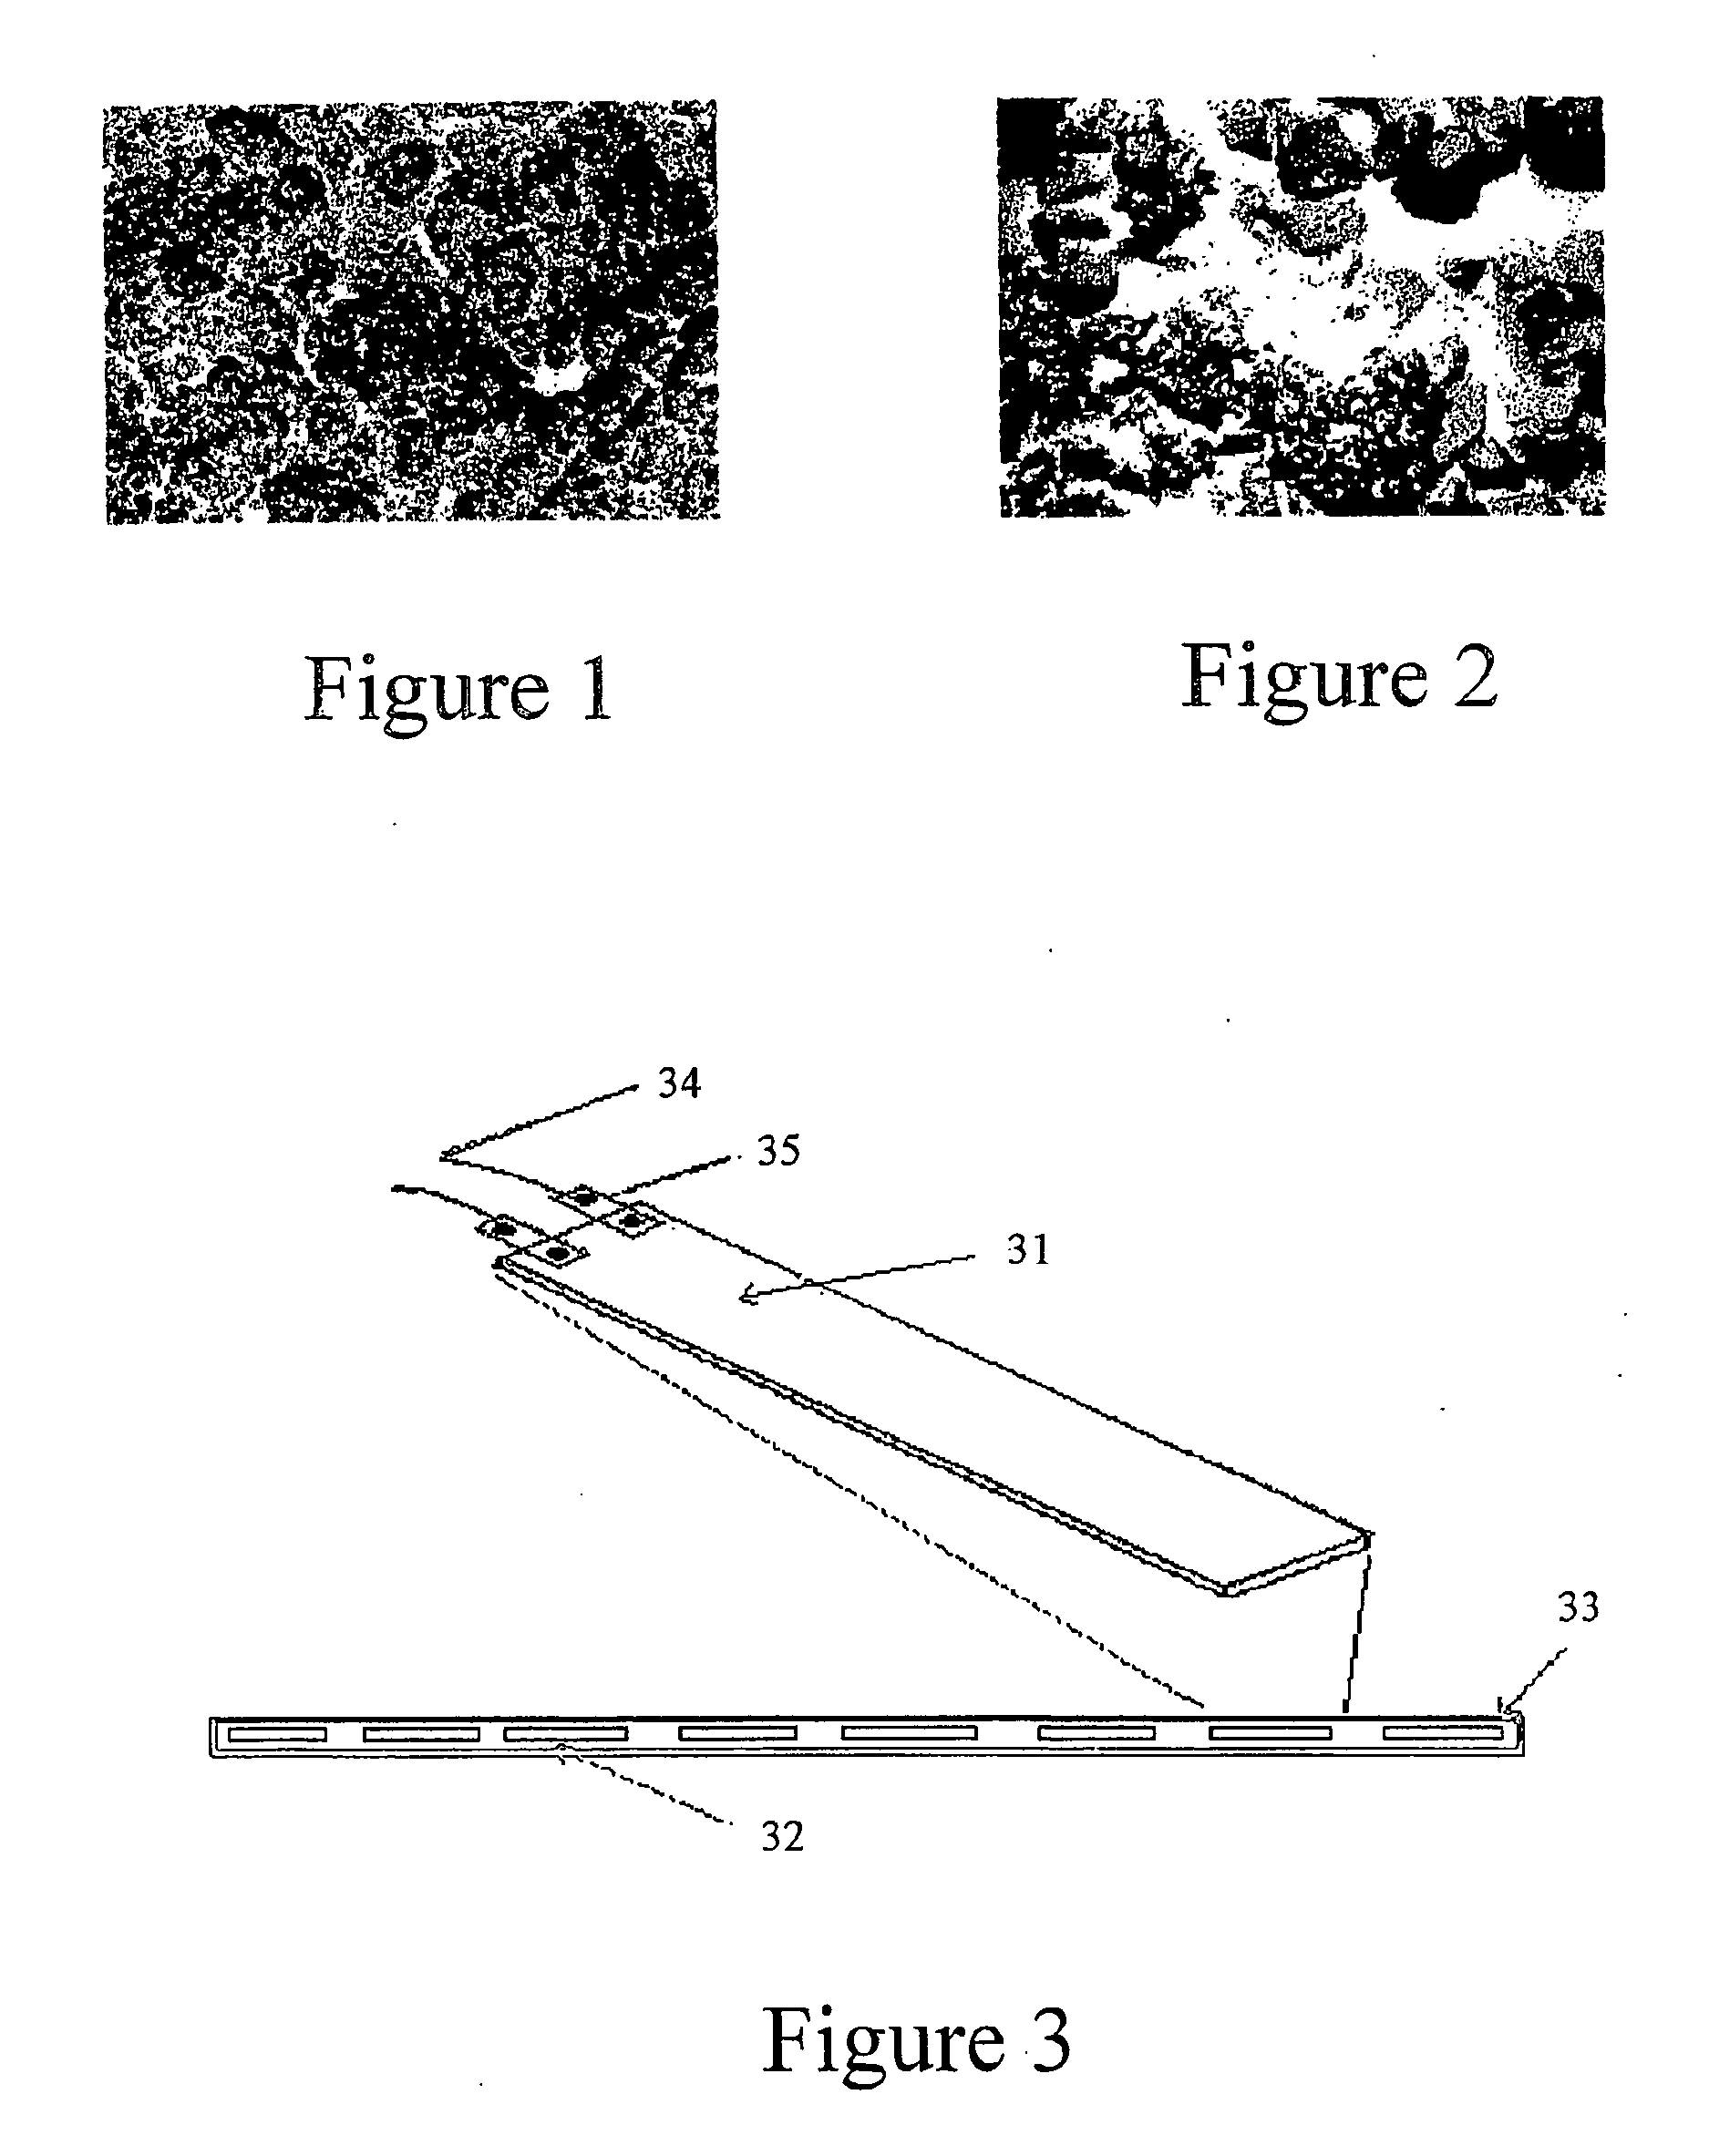 Device, system and method for improving efficiency and preventing degradation of energy storage devices